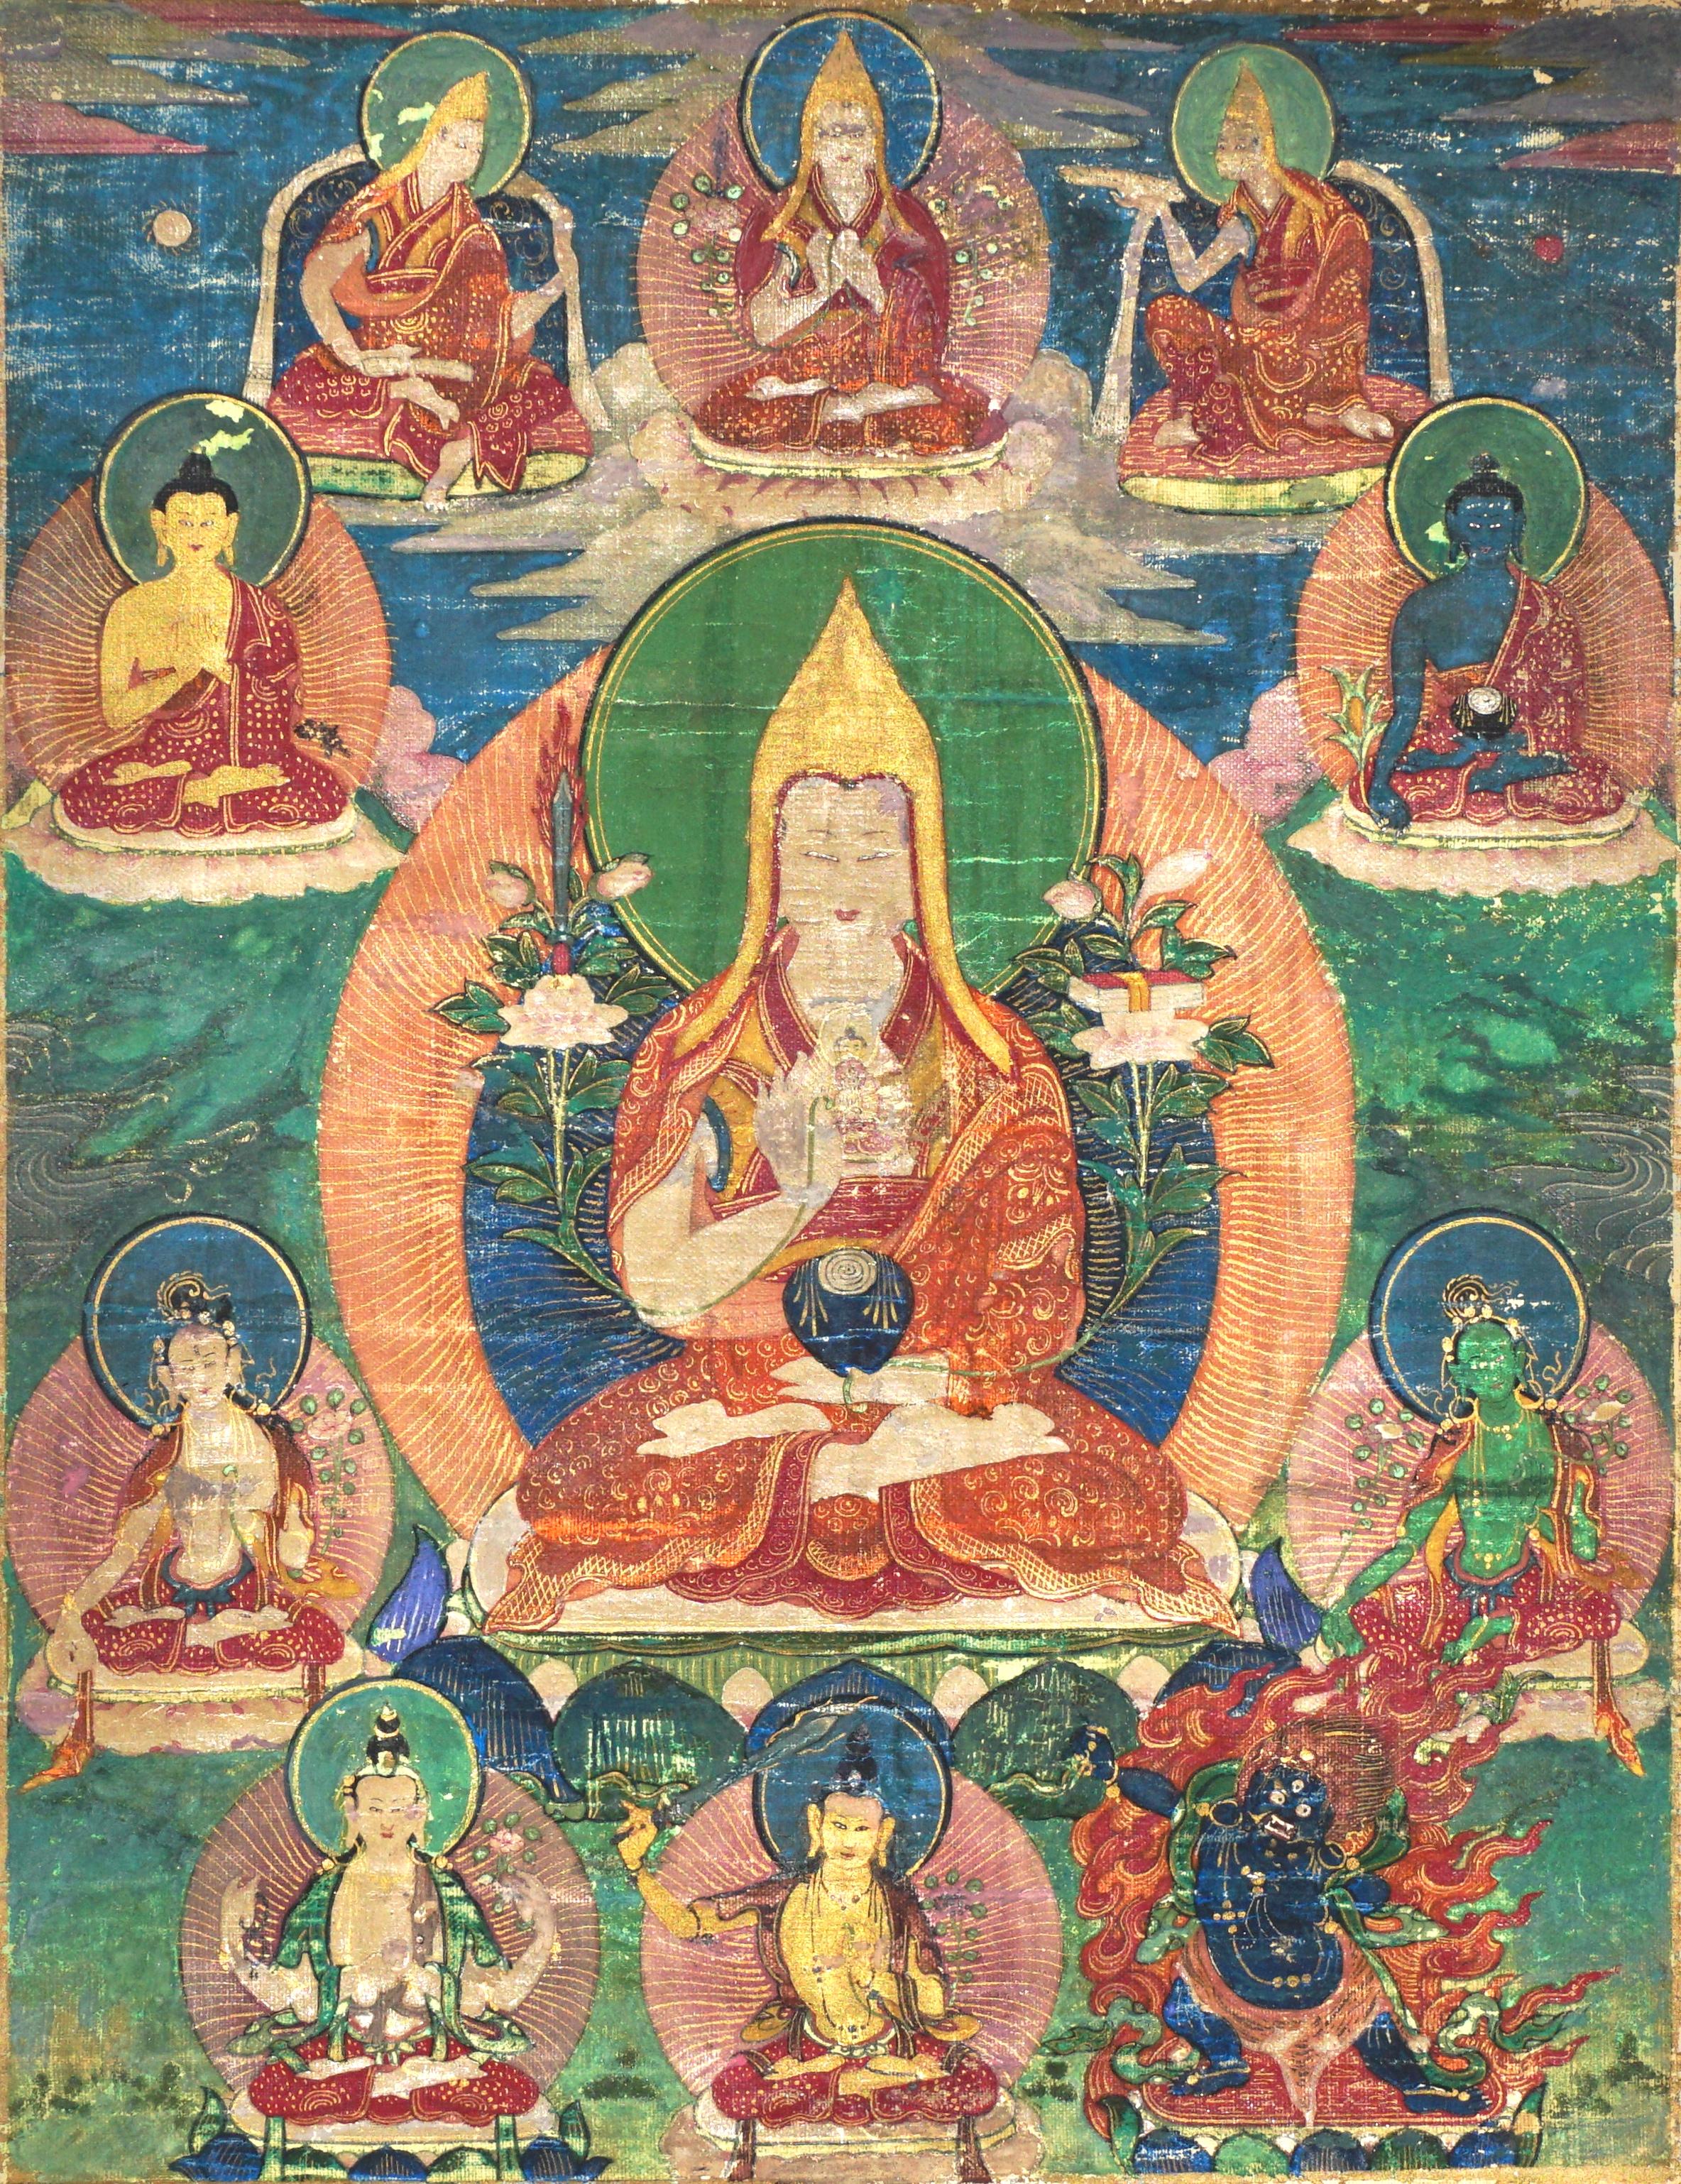 A Thangka of Tsongkhapa, Tibet, 18th-19th century

Intricately painted in fine detail with gouache and gold on linen. The thangka is a representation of Je Tsongkhapa, a very revered Tibetan scholar. He is seated with Sakymuni Buddha, Avalokatesvara